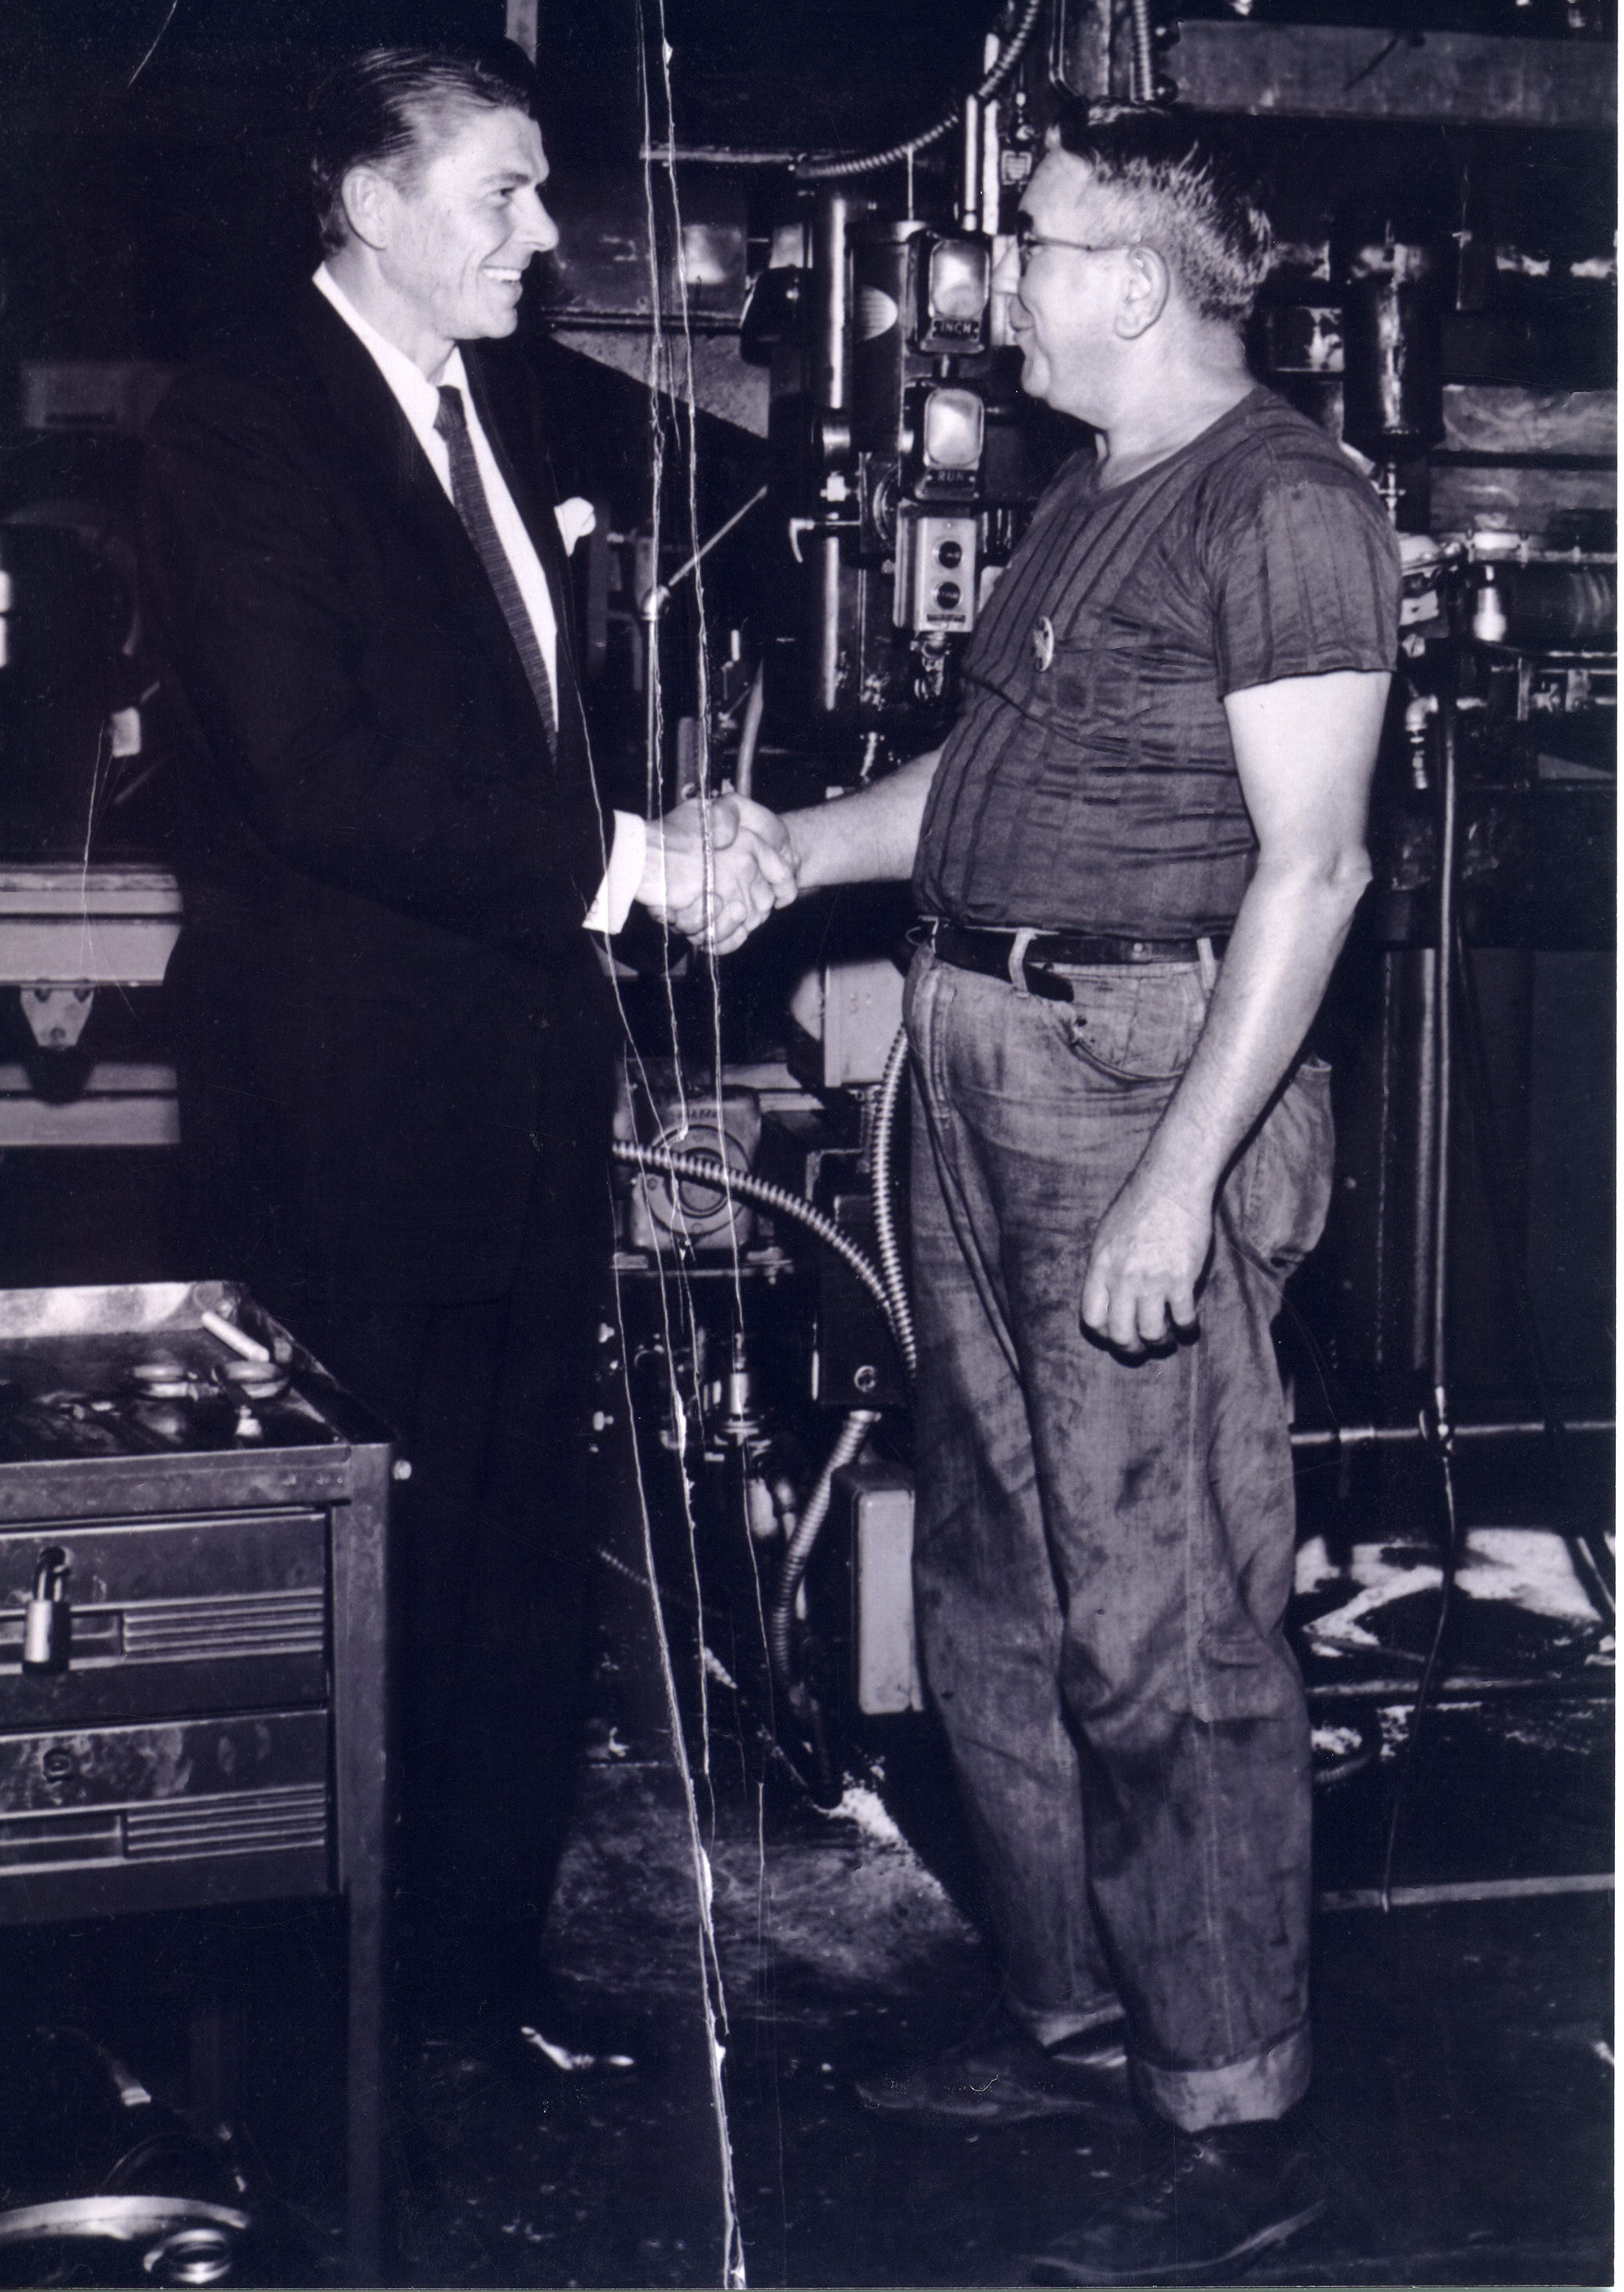 Ronald Reagan visiting with Glenn Page at a (GE) General Electric Plant